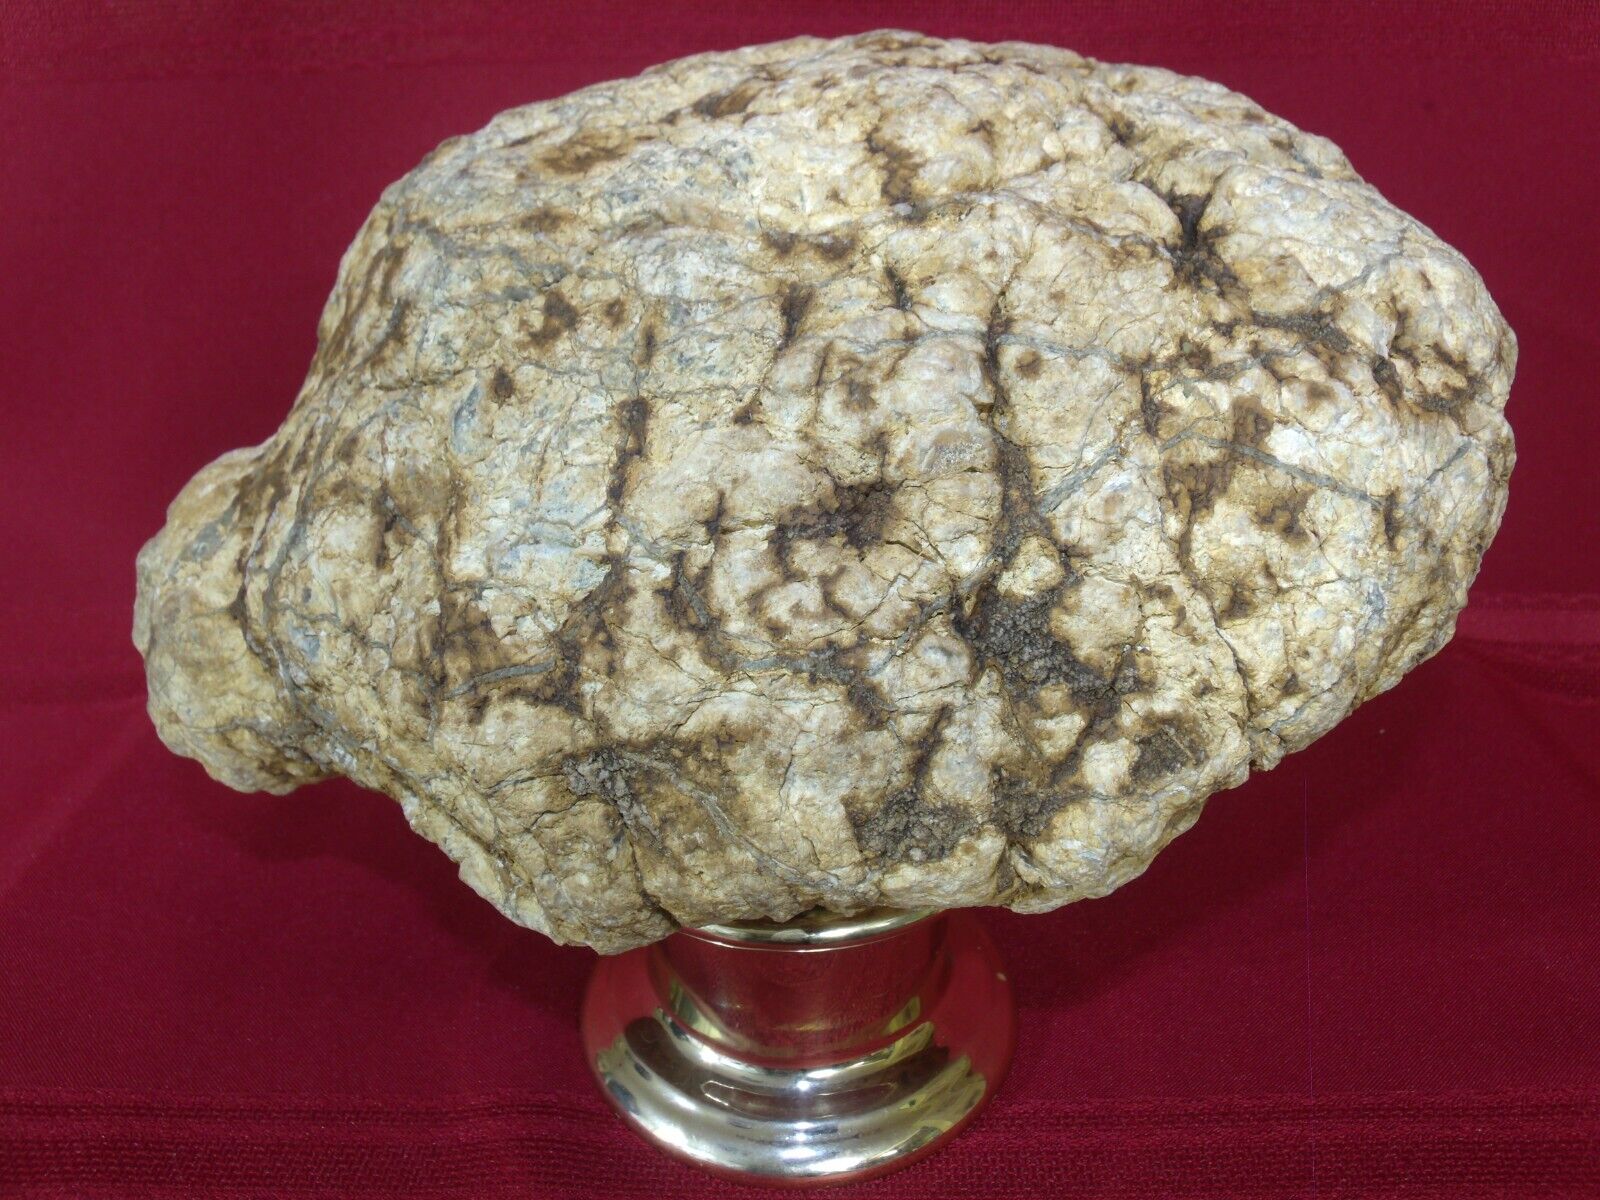 Large Unopened Geode 14.7lbs Rare Turtle Shaped KY Crystal Quartz Unique Gift